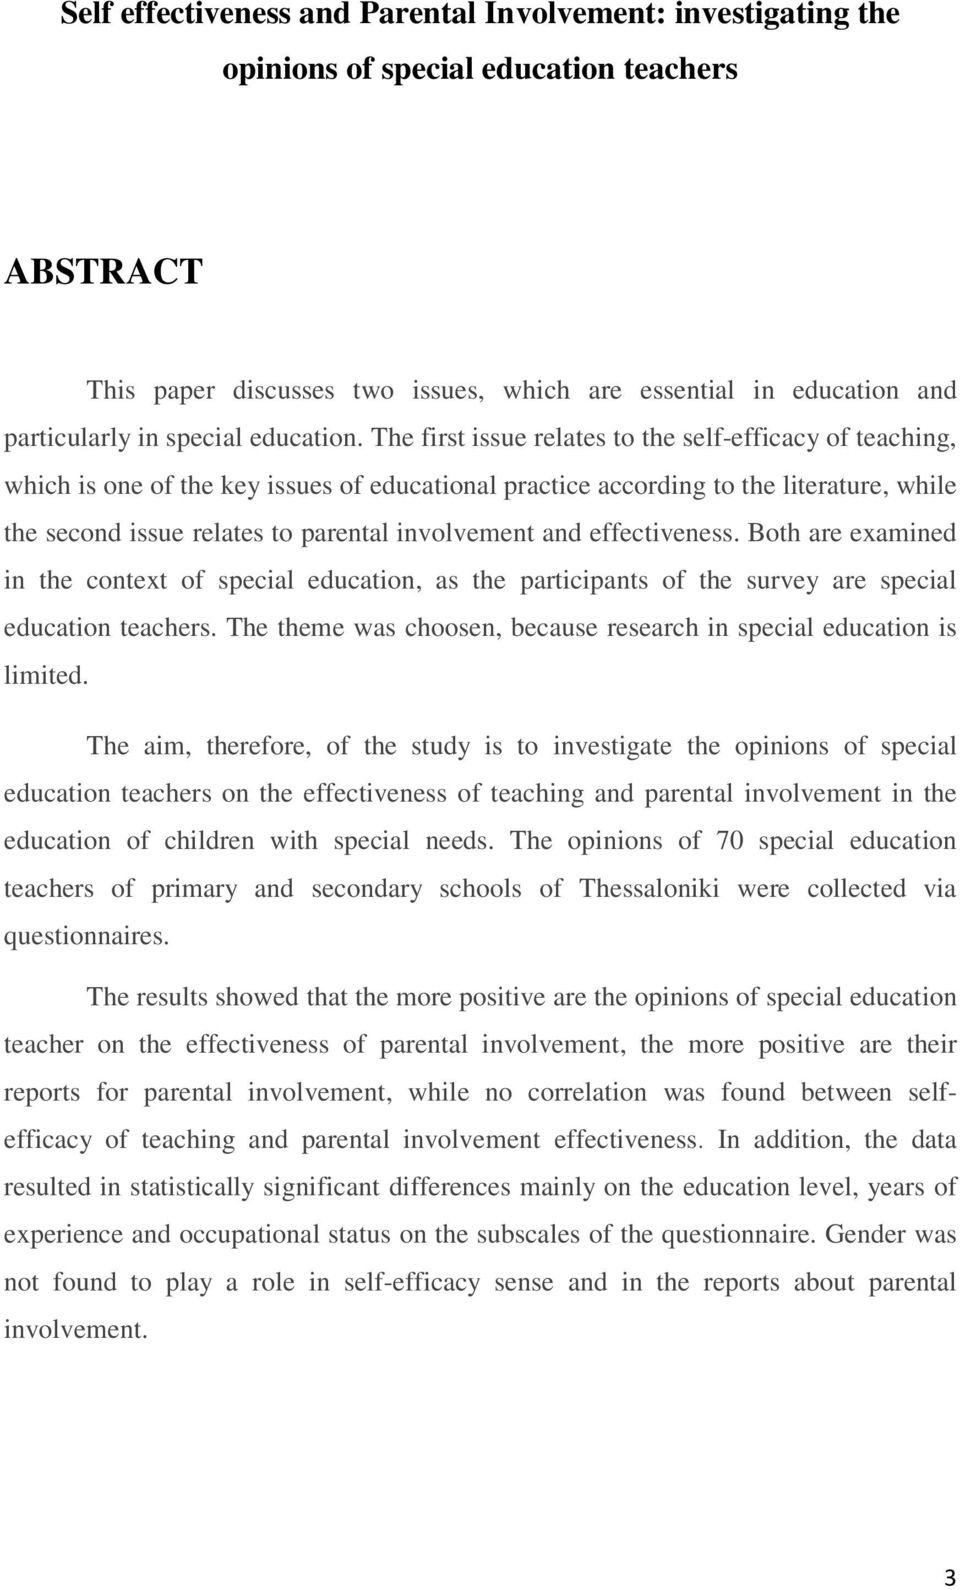 The first issue relates to the self-efficacy of teaching, which is one of the key issues of educational practice according to the literature, while the second issue relates to parental involvement